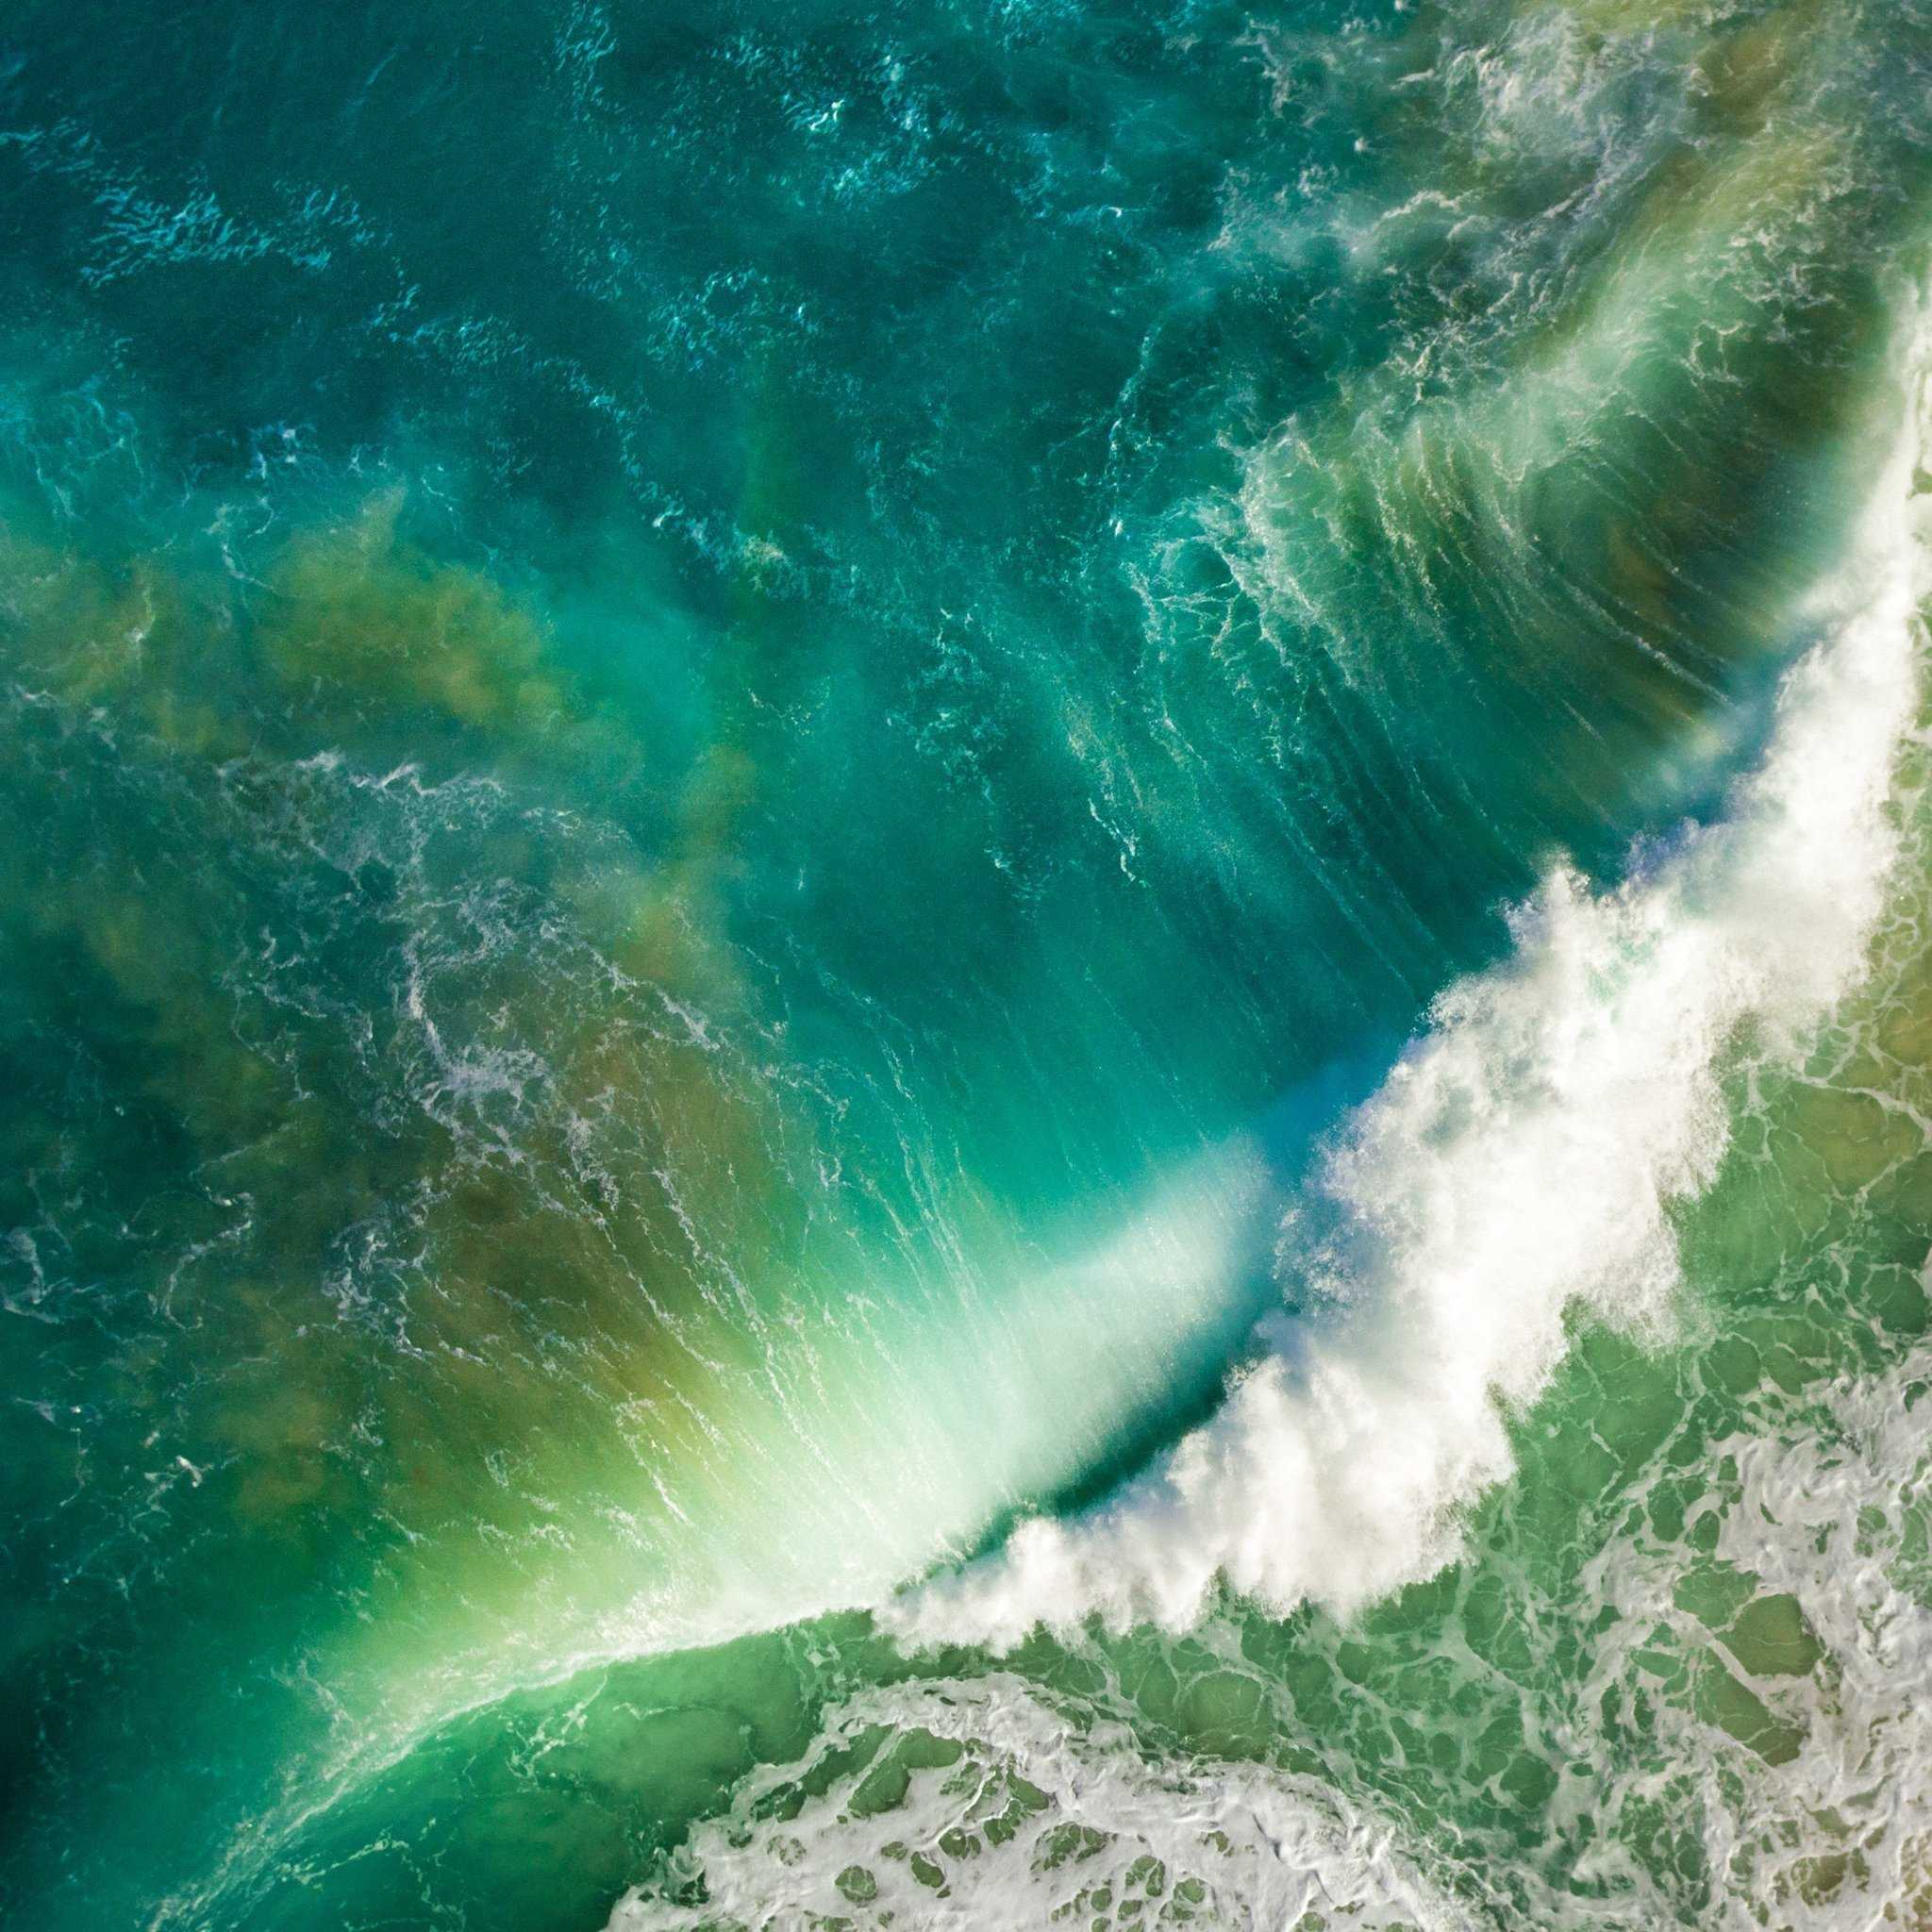 Download Apple's fancy wallpapers from iOS 10 and macOS